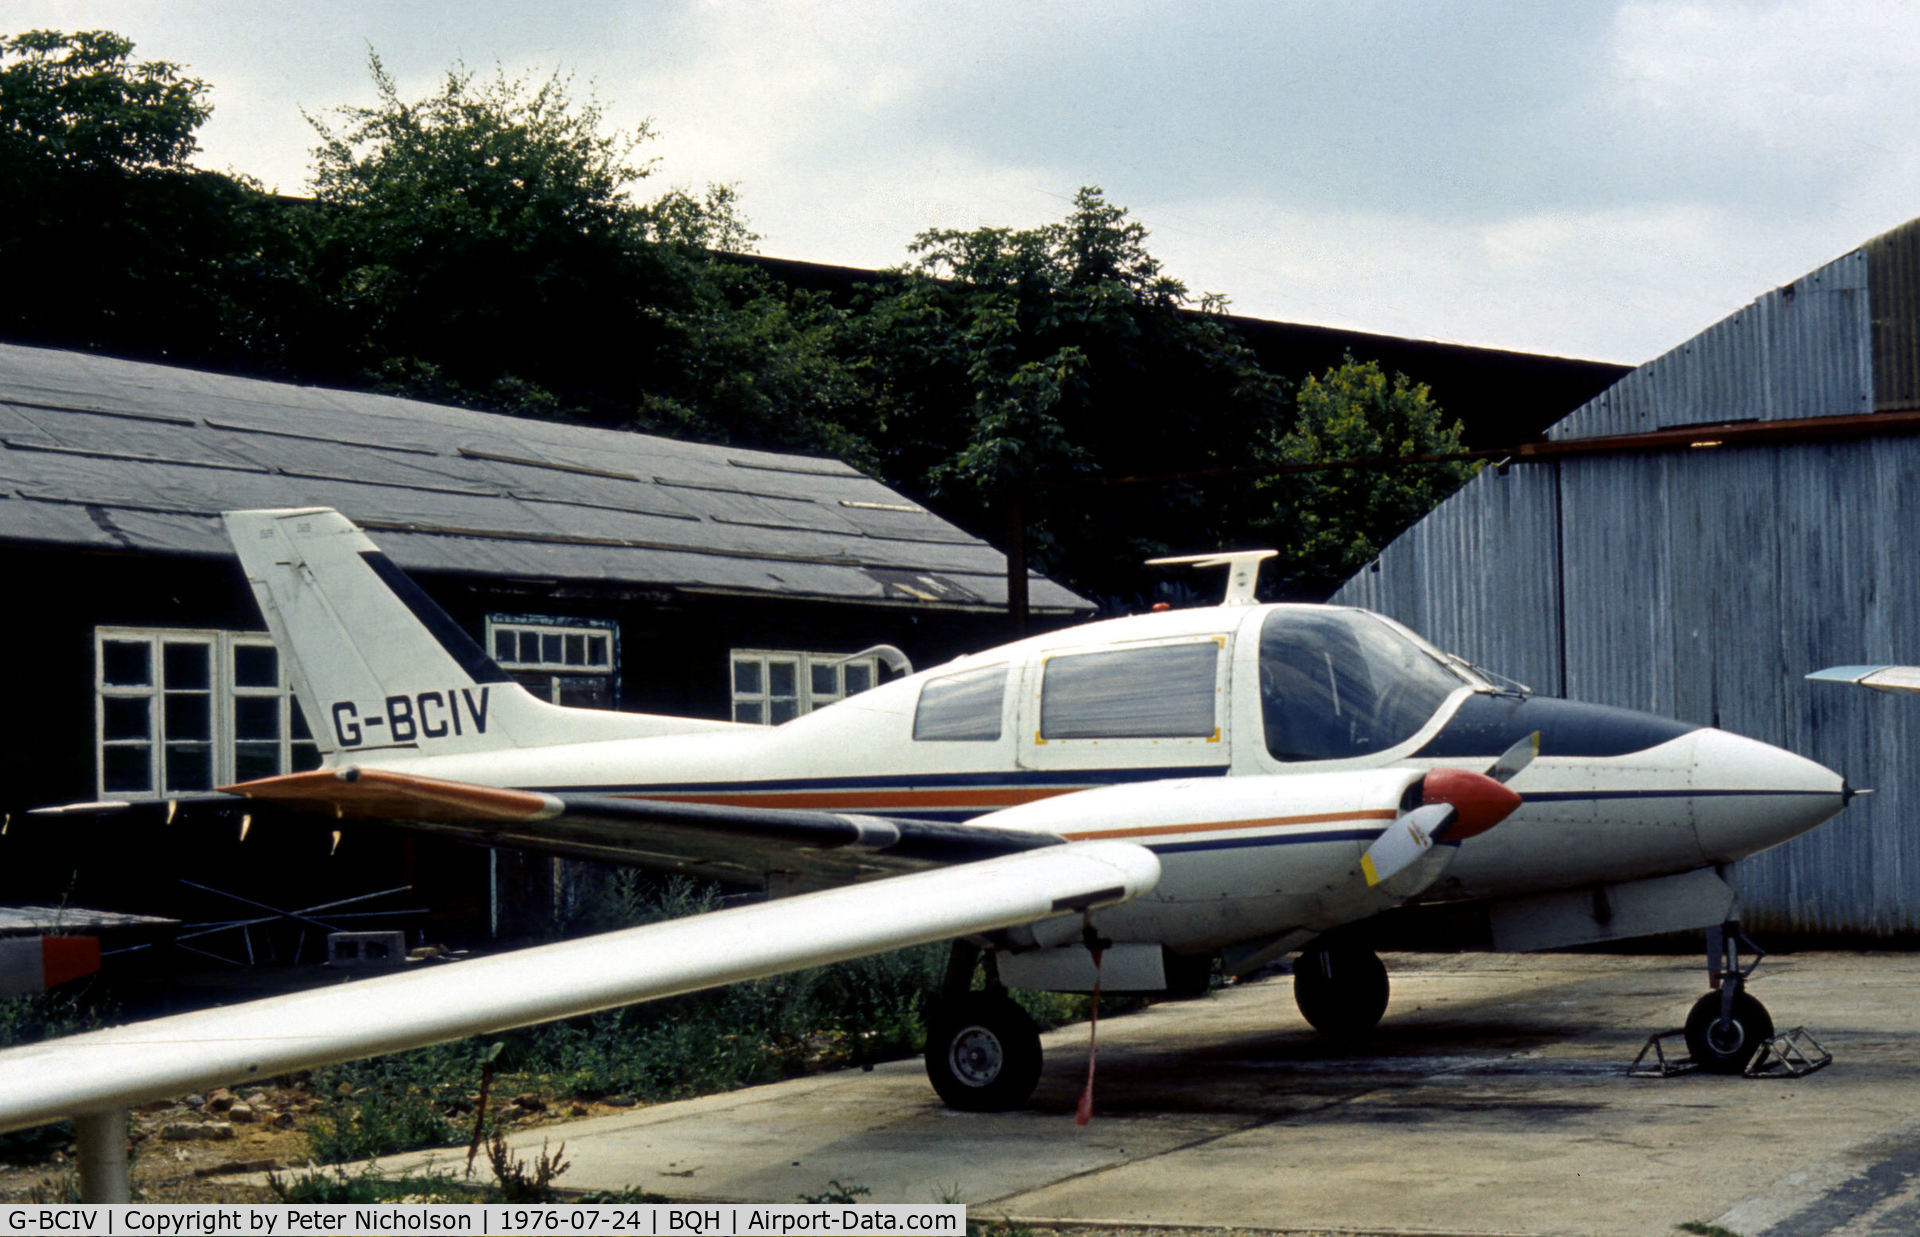 G-BCIV, 1965 Beagle B-206 Series 1 C/N B025, This Beagle B.206 was seen at Biggin Hill in the Summer of 1976.